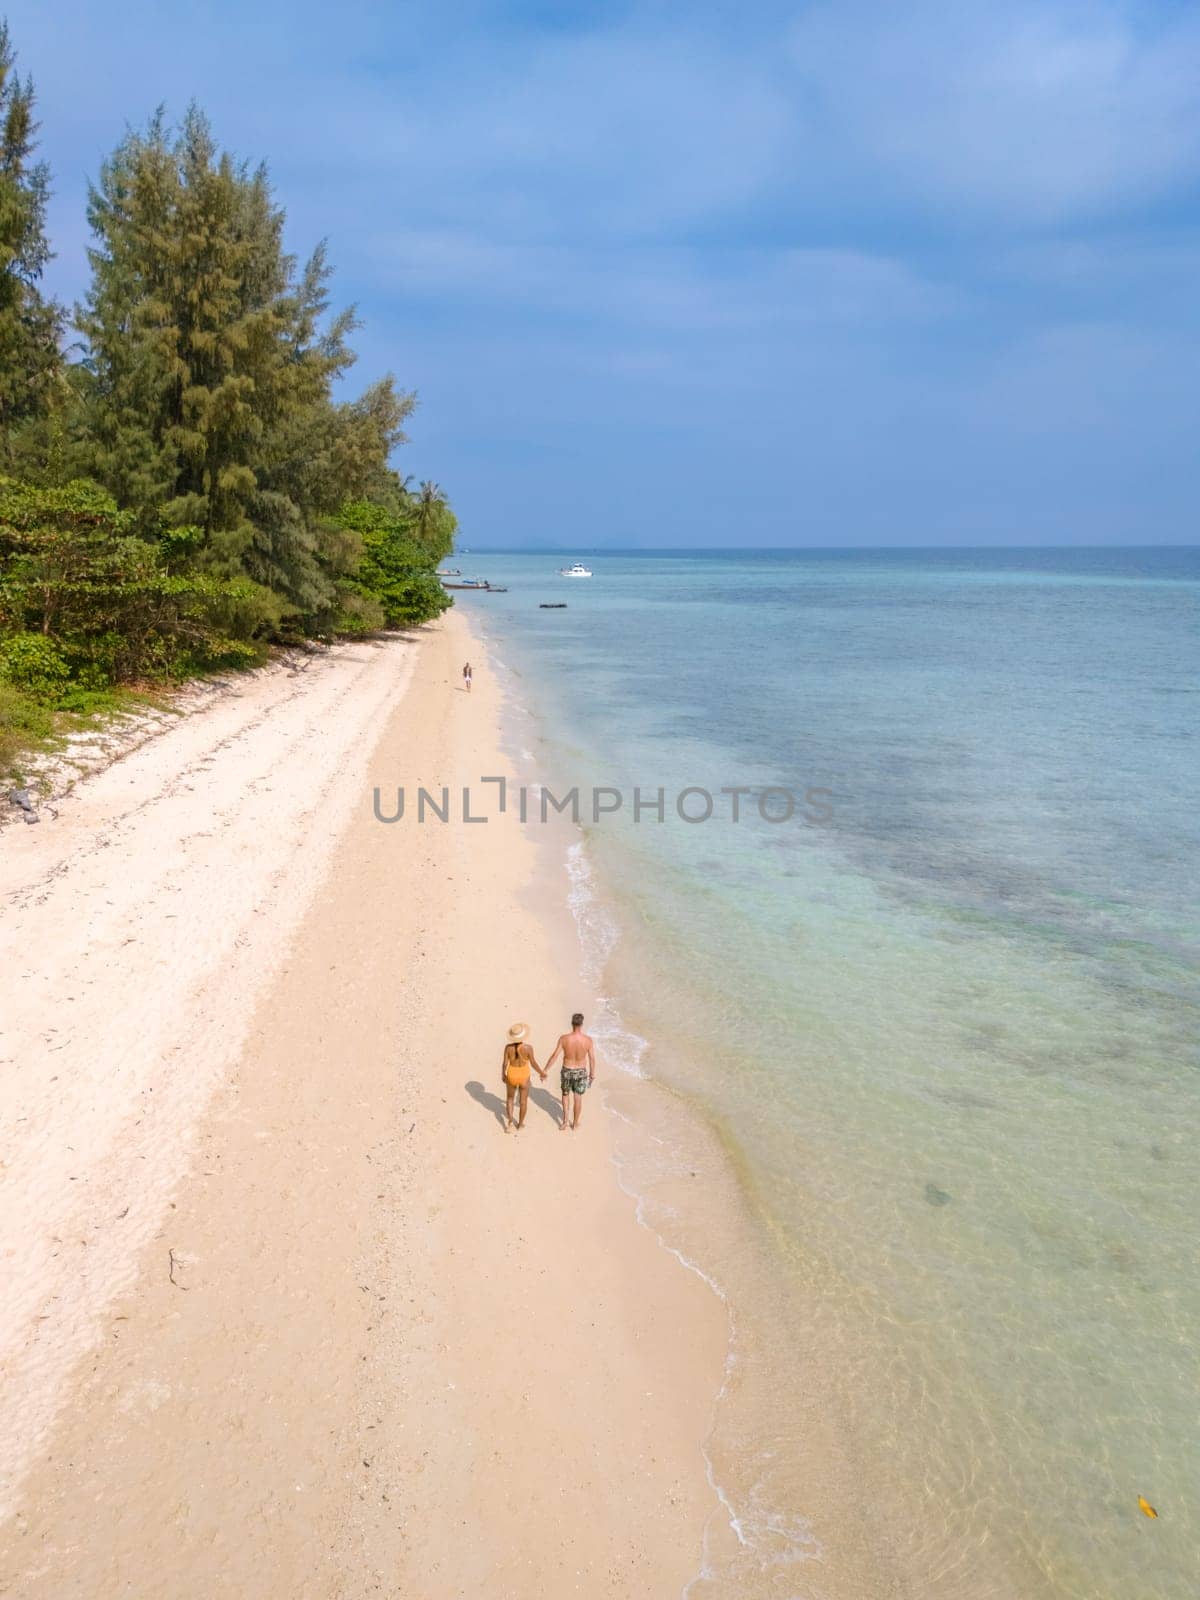 Drone aerial view at Koh Ngai island with palm trees soft white sand, and a turqouse colored ocean in Koh Ngai Trang Thailand, a couple of men and woman walking at tropical beach